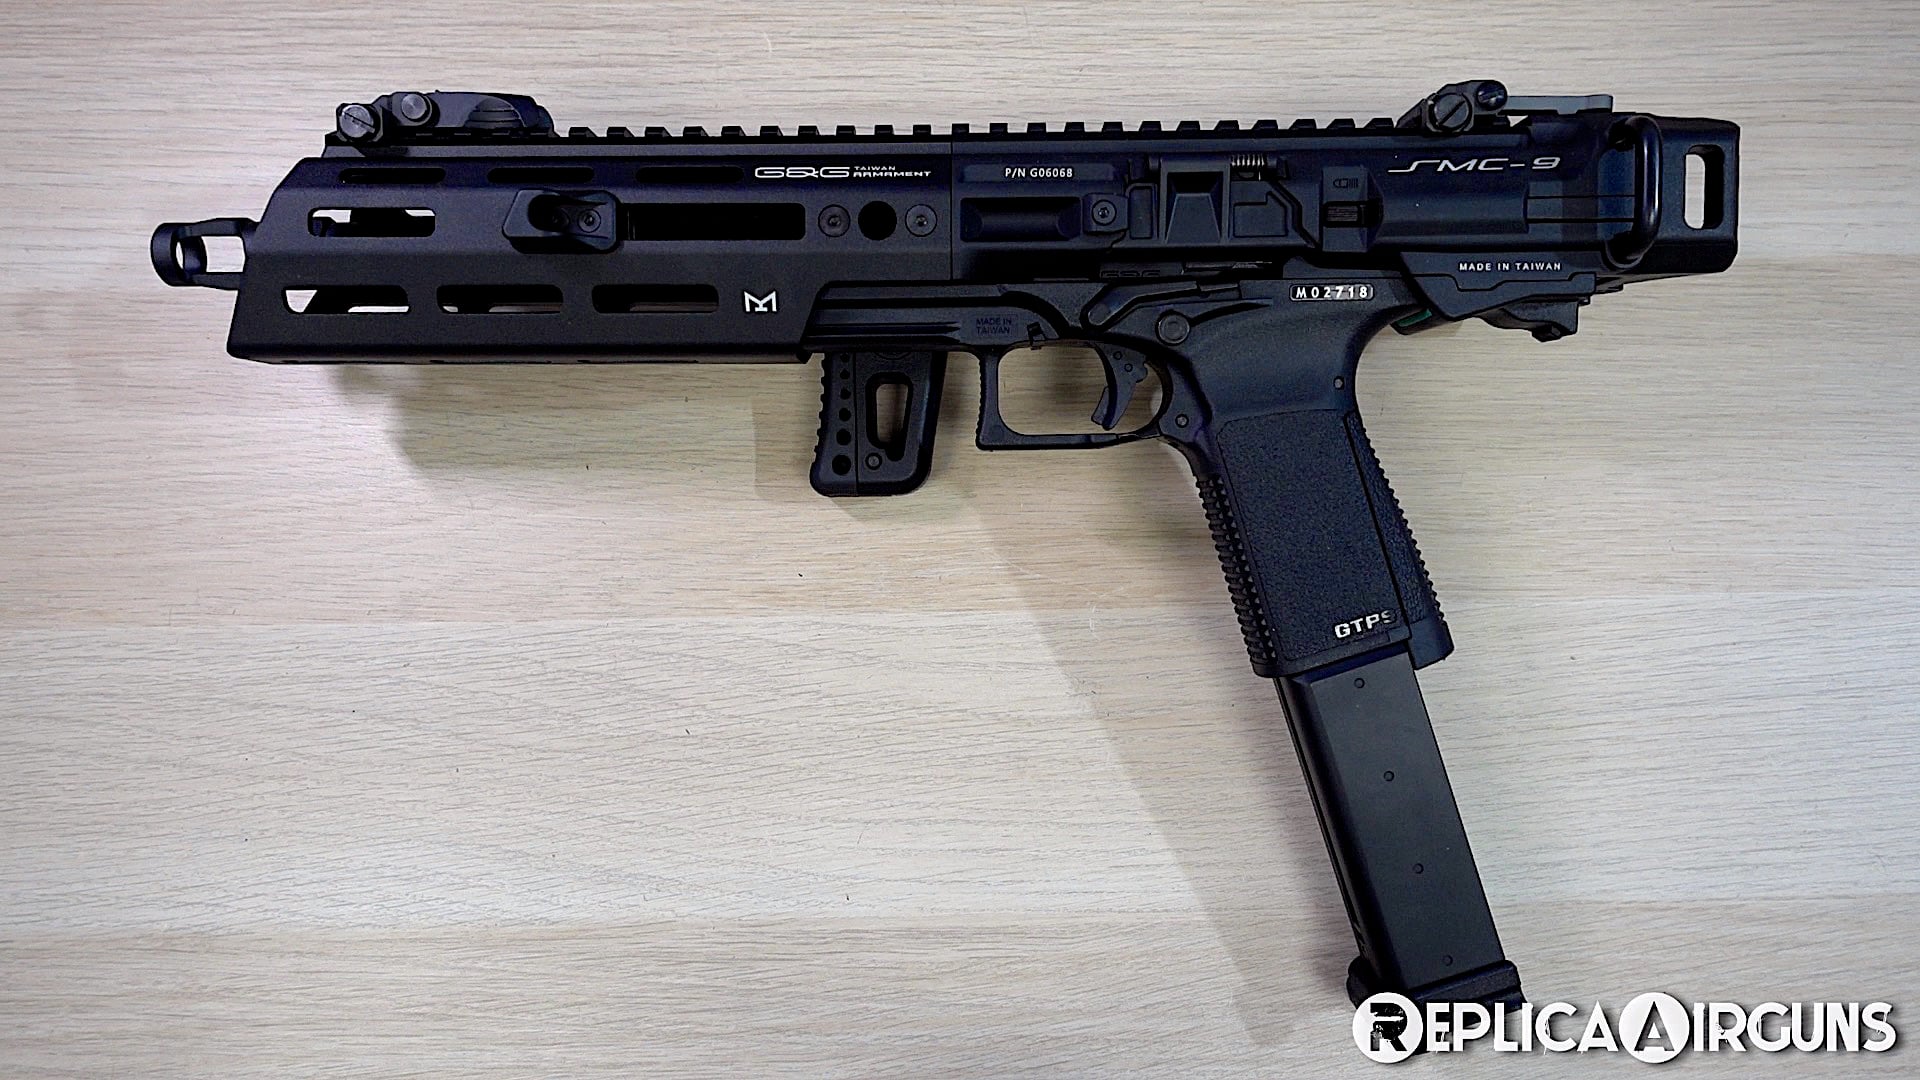 G&G SMC-9 GBB Airsoft Carbine Table Top Review